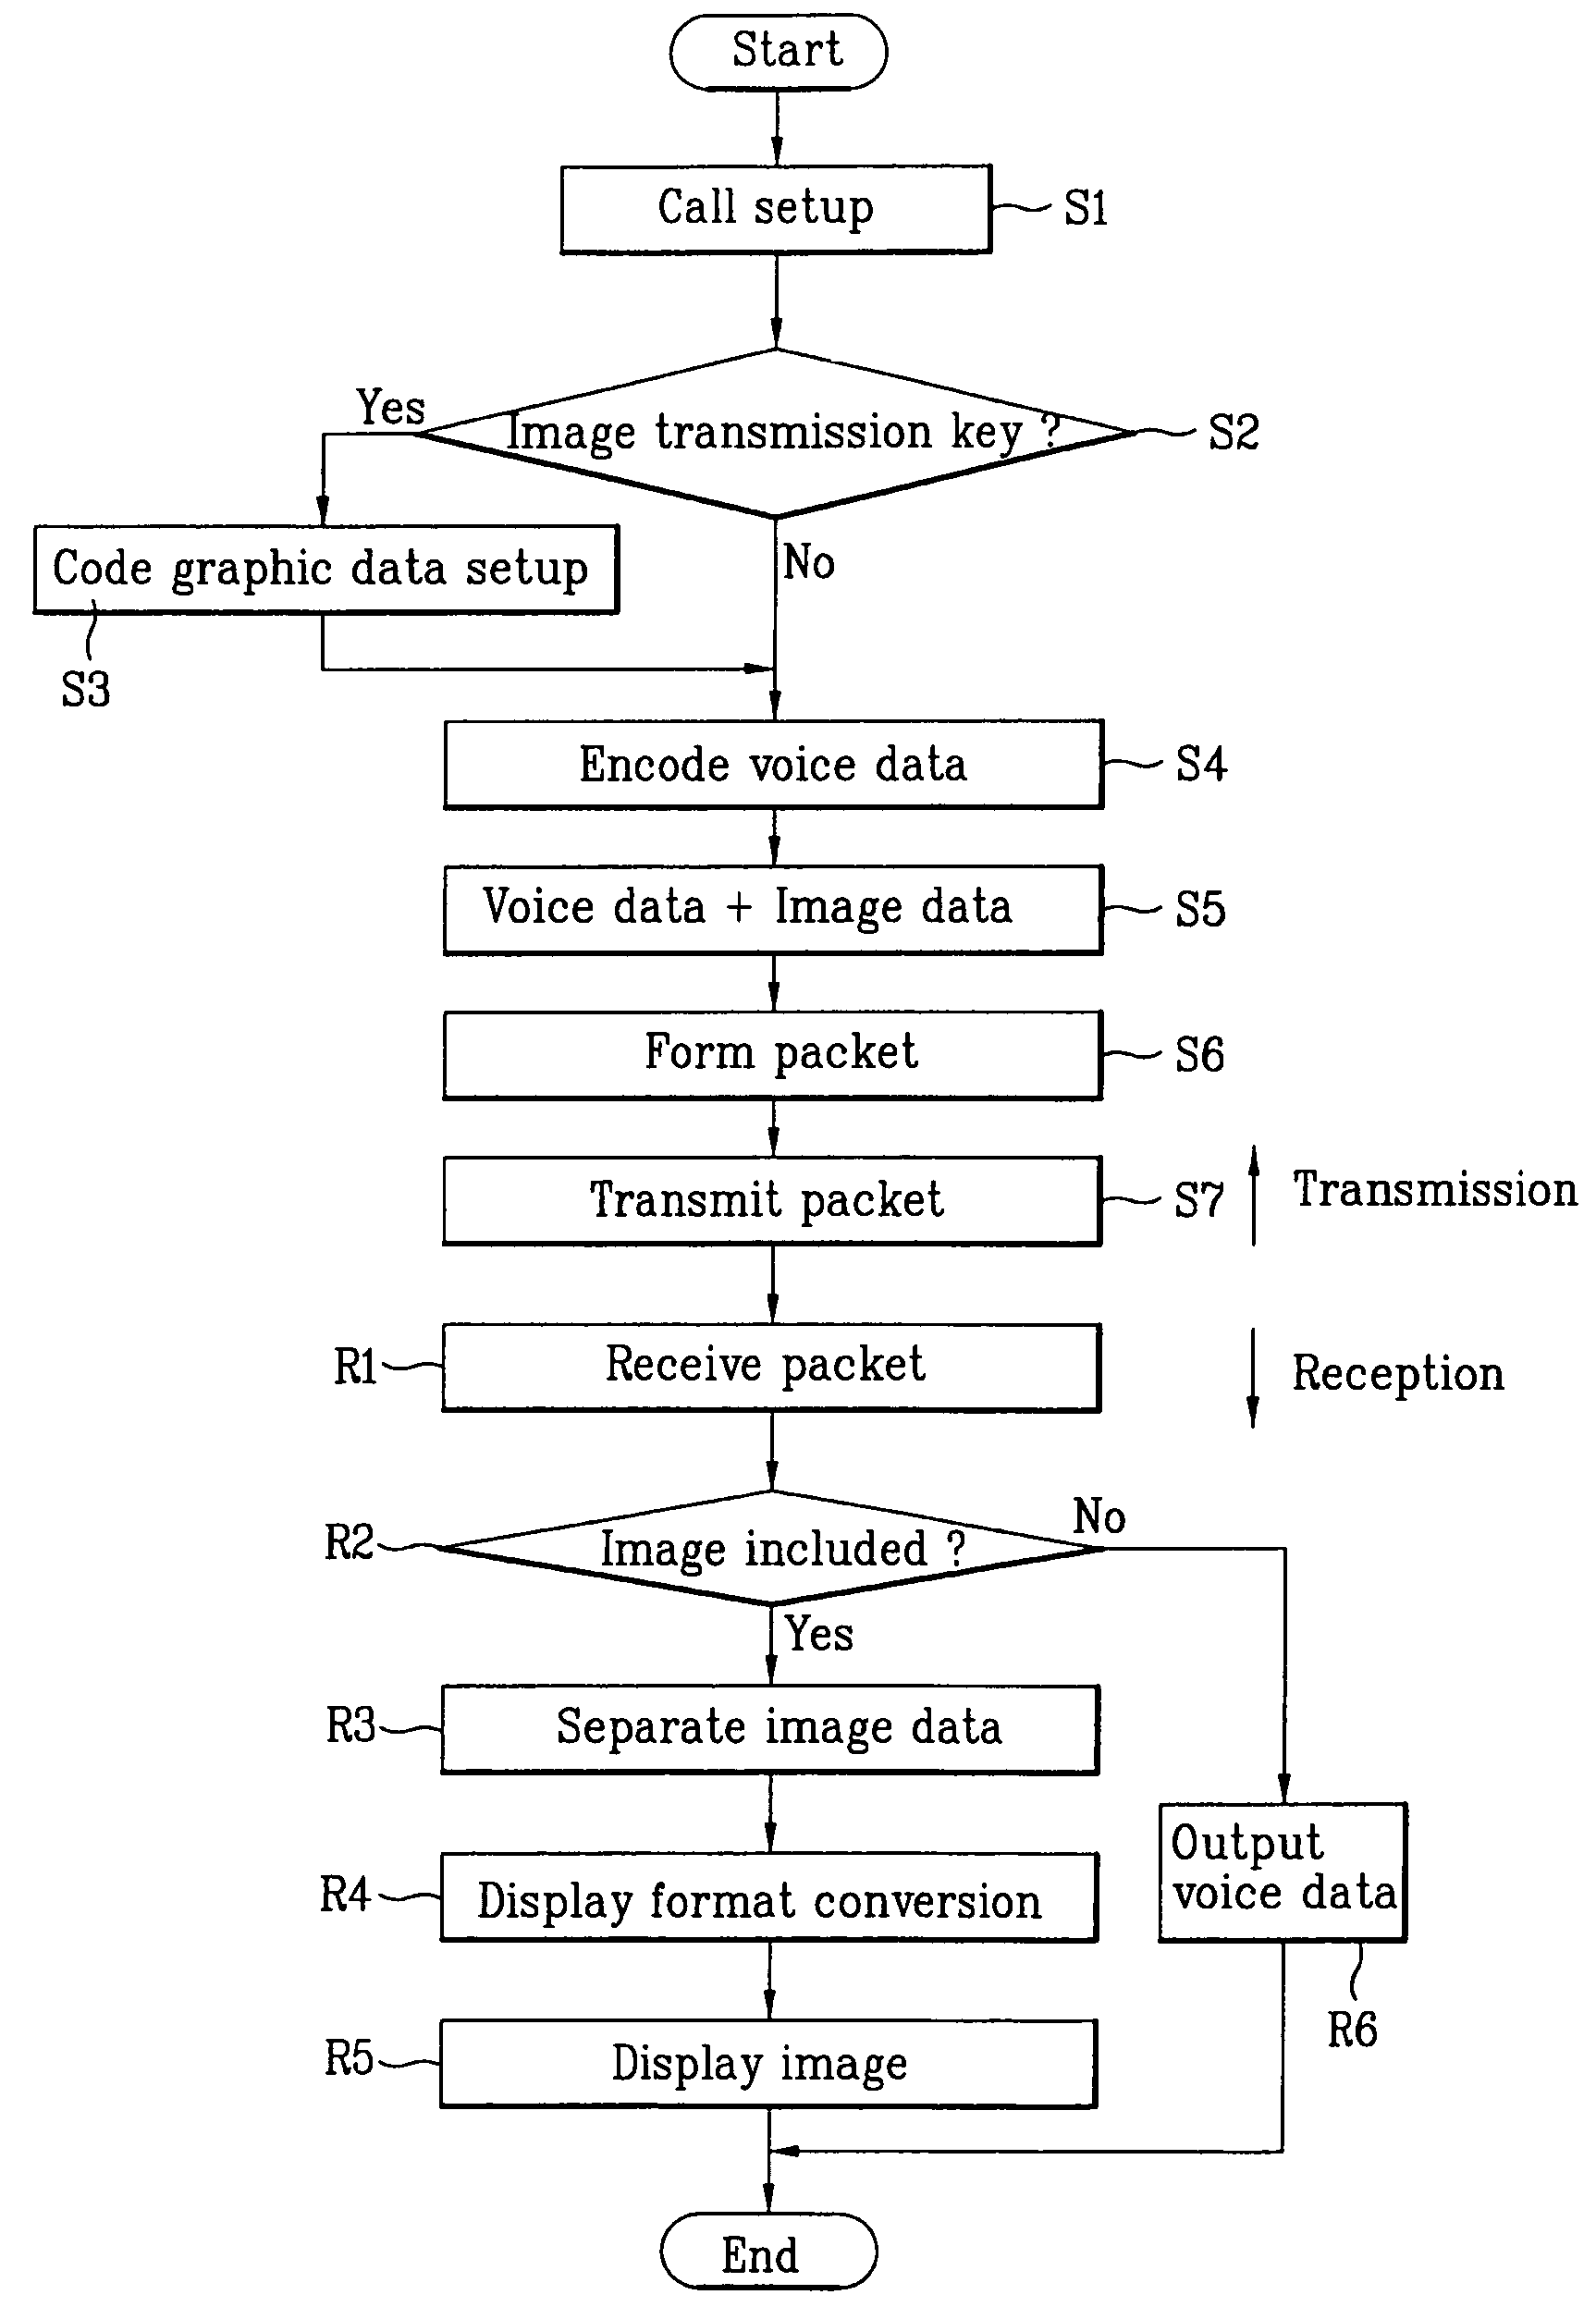 Mobile communication terminal for transmitting/receiving image data over group communication network and method for transmitting/receiving image data using the mobile communication terminal